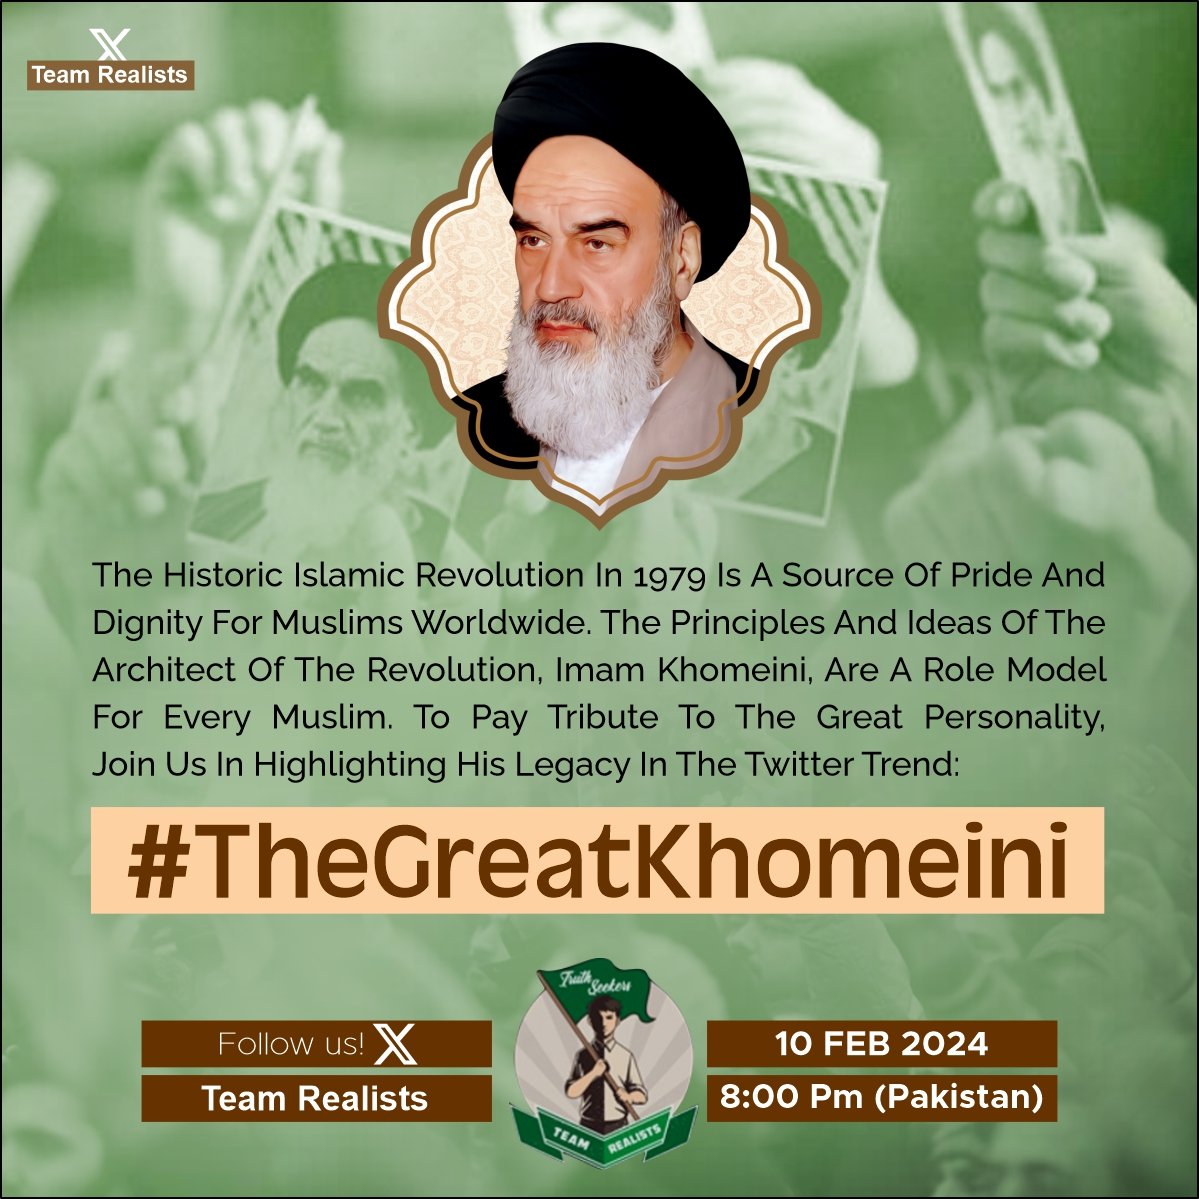 The historic Islamic Revolution in 1979 and the personality of Imam Khomeini, are a source of pride and dignity for Muslims worldwide. To pay tribute to the legacy of this great personality, join us in highlighting his legacy by using the HT #TheGreatKhomeini 10 Feb 2024 @ 8 pm